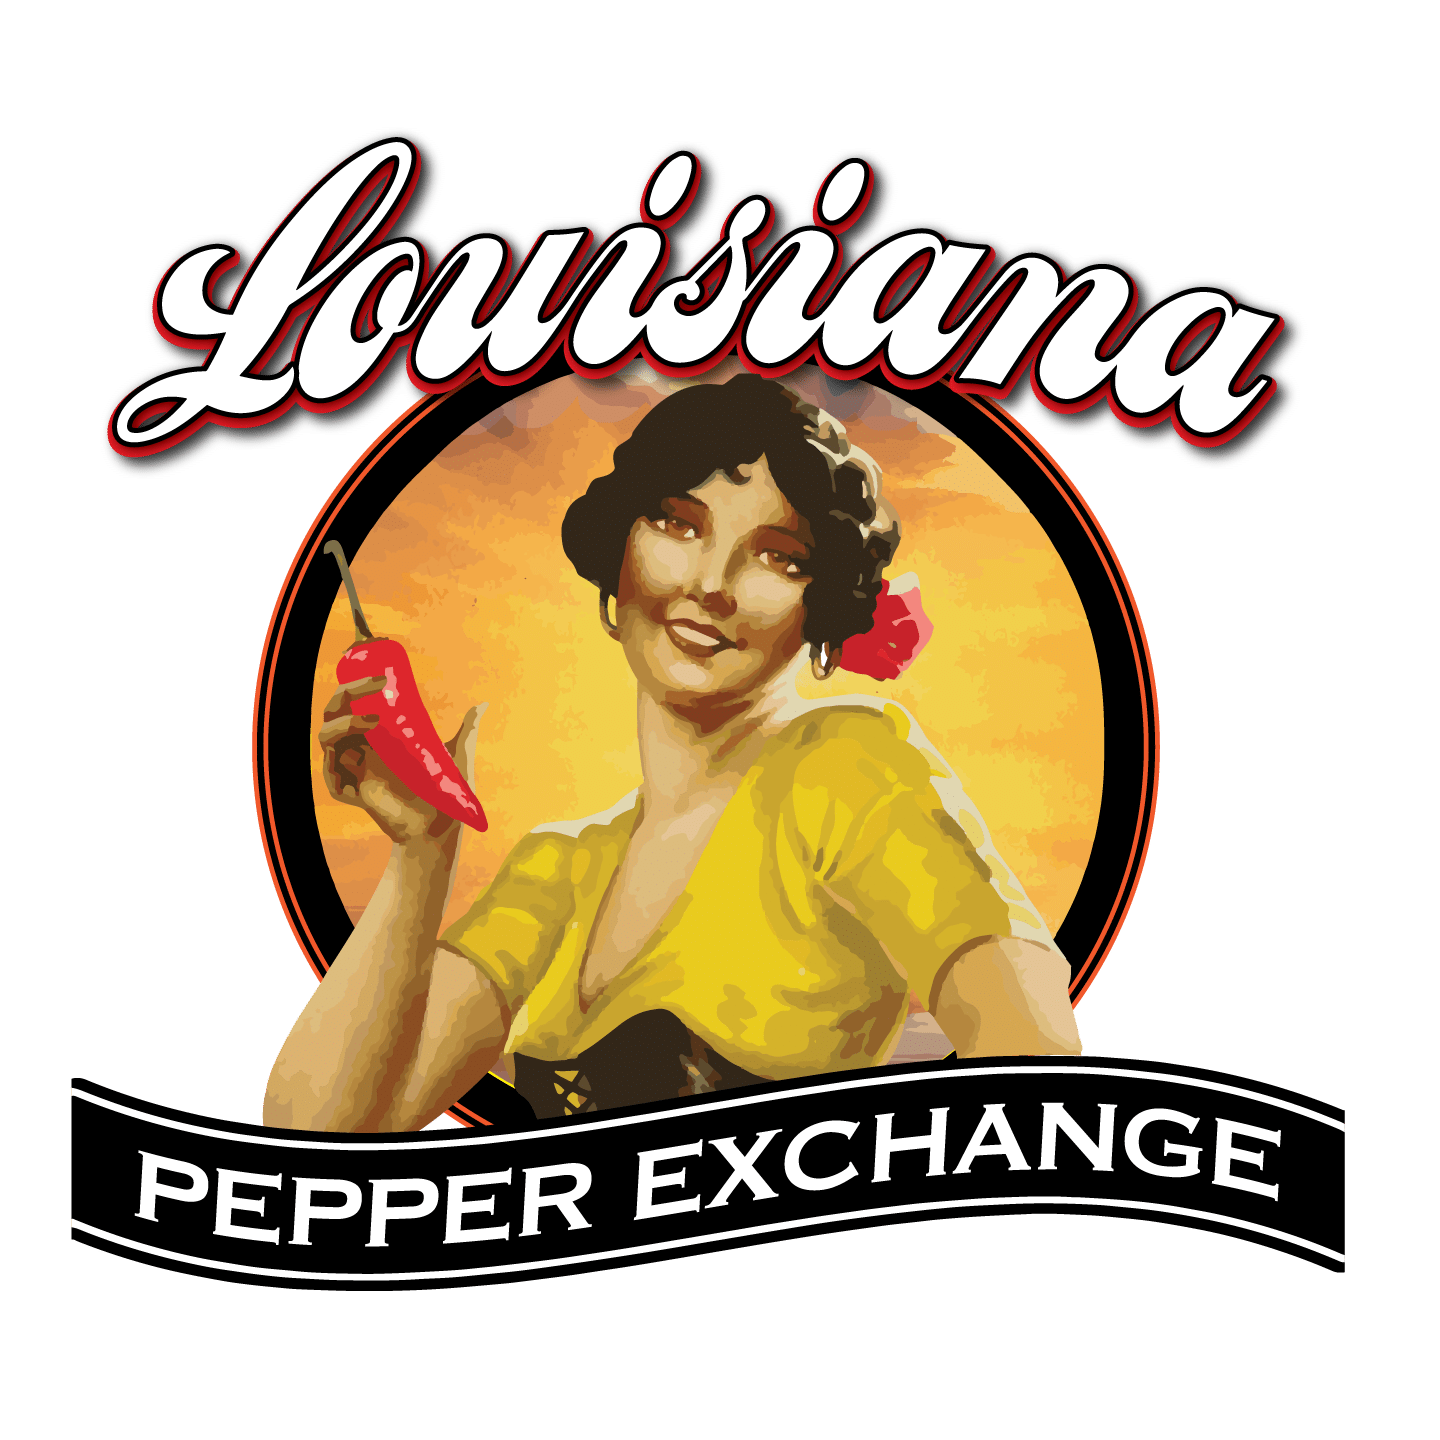 Peppers Unlimited of Louisiana, Inc.